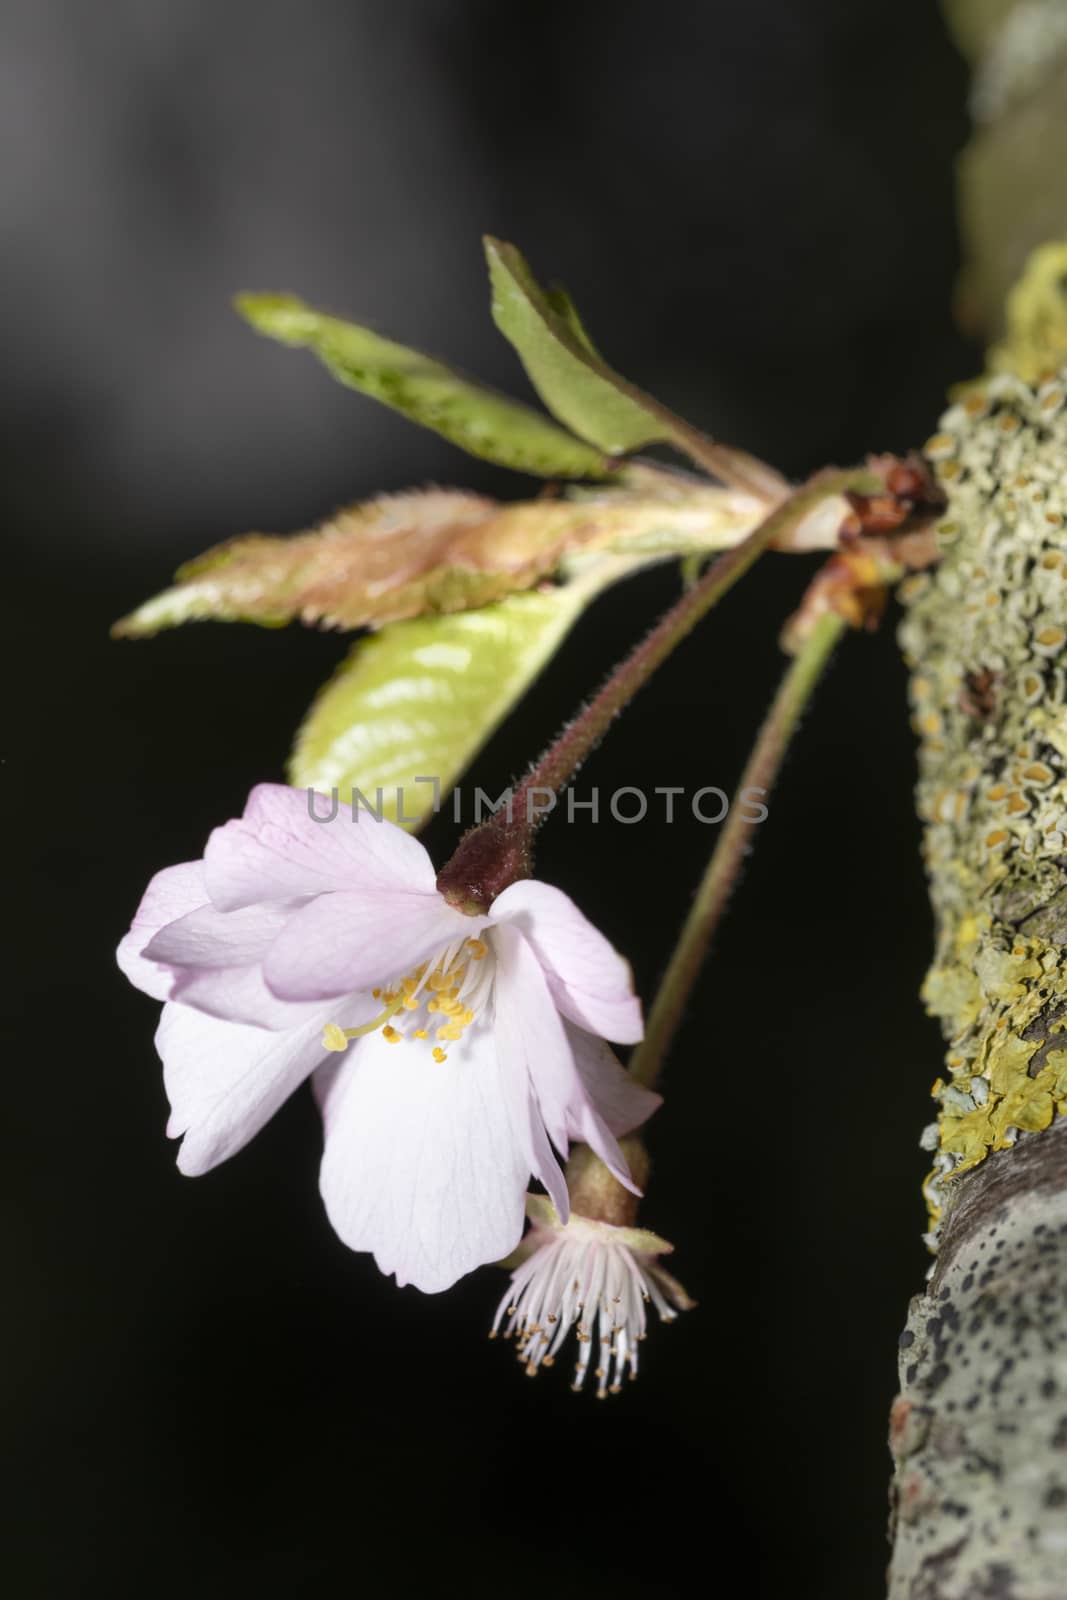 New Japanese cherry blossoms growing from the main trunk by ankorlight